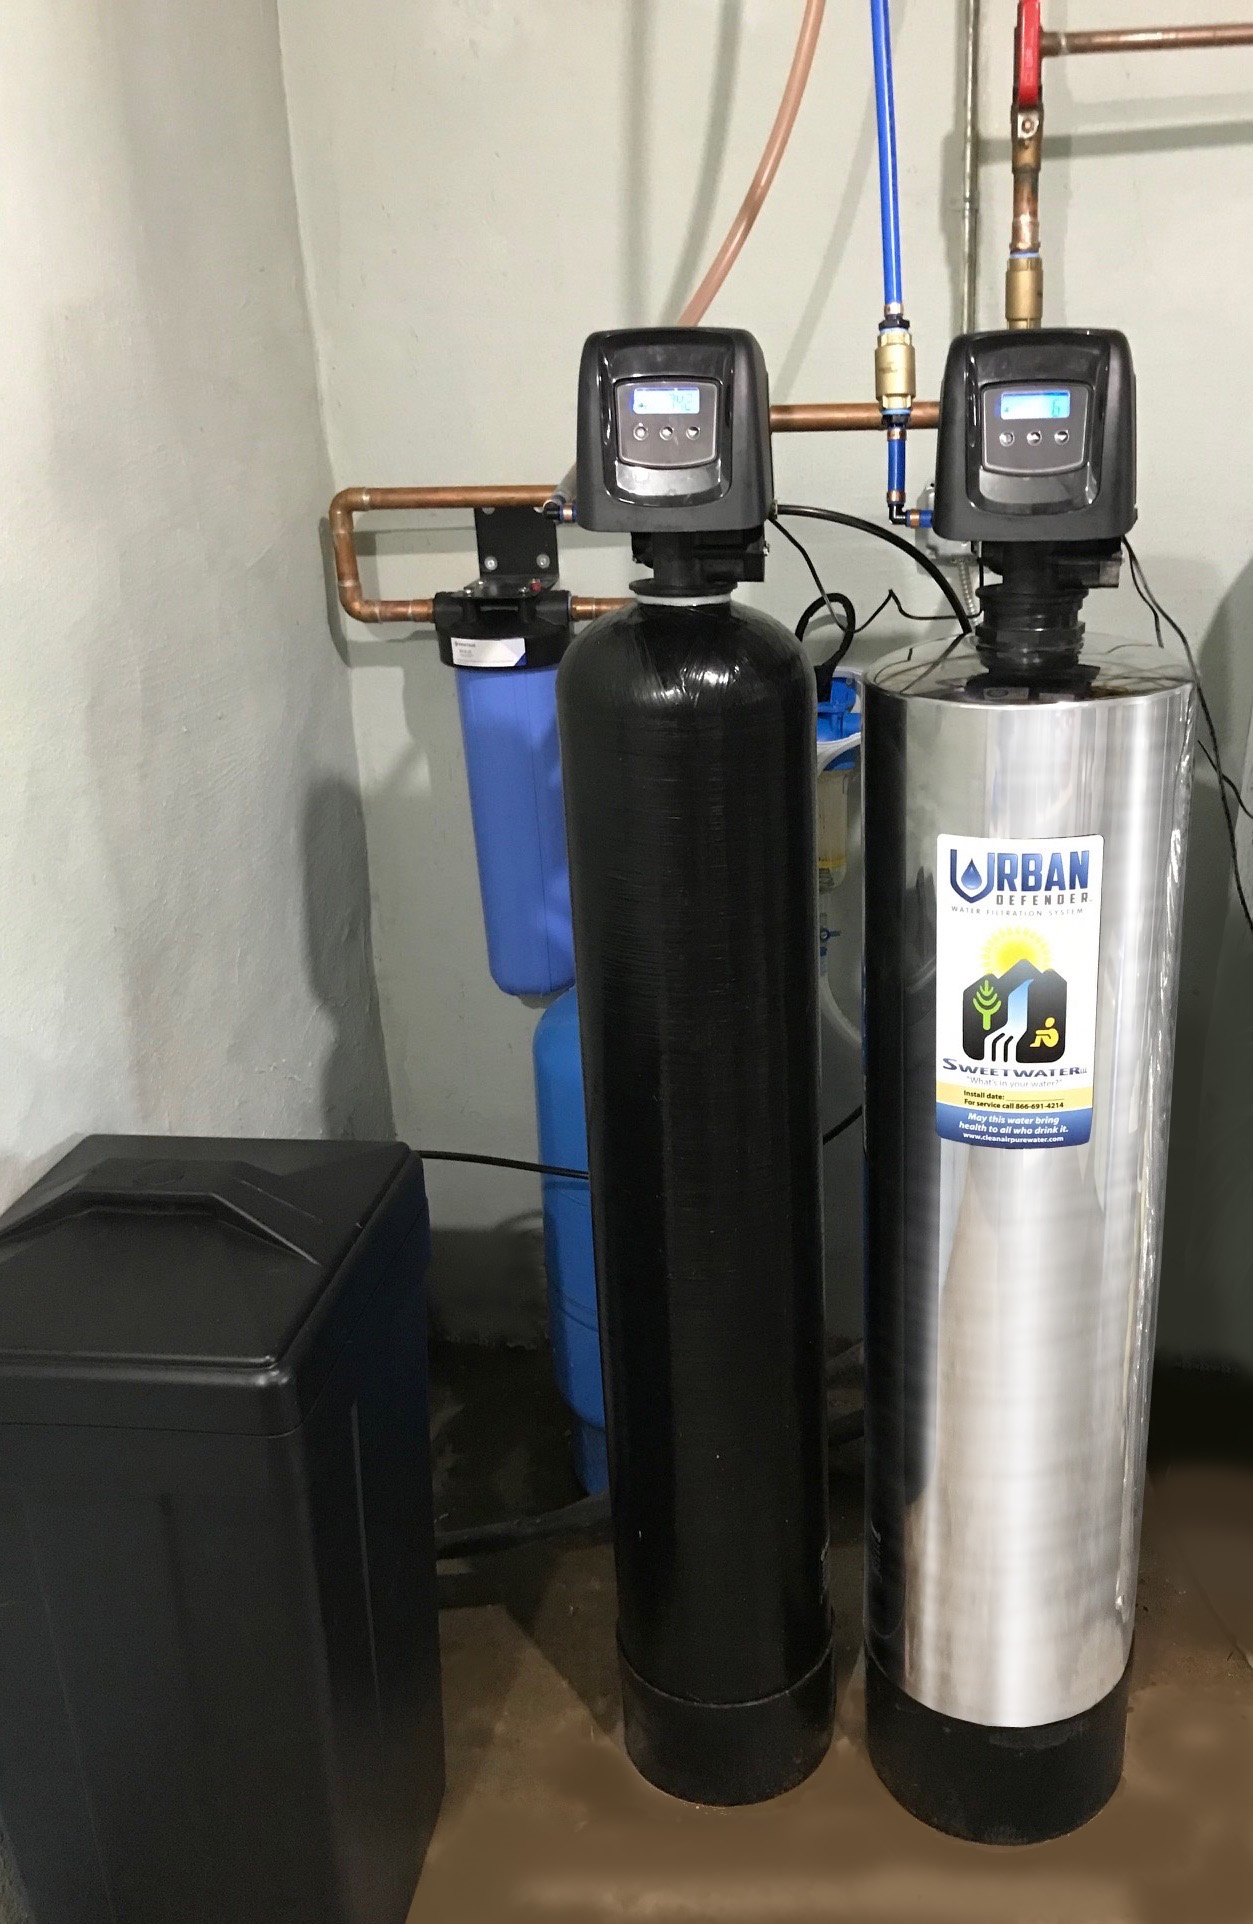 Urban Defender whole house water filter with water softener